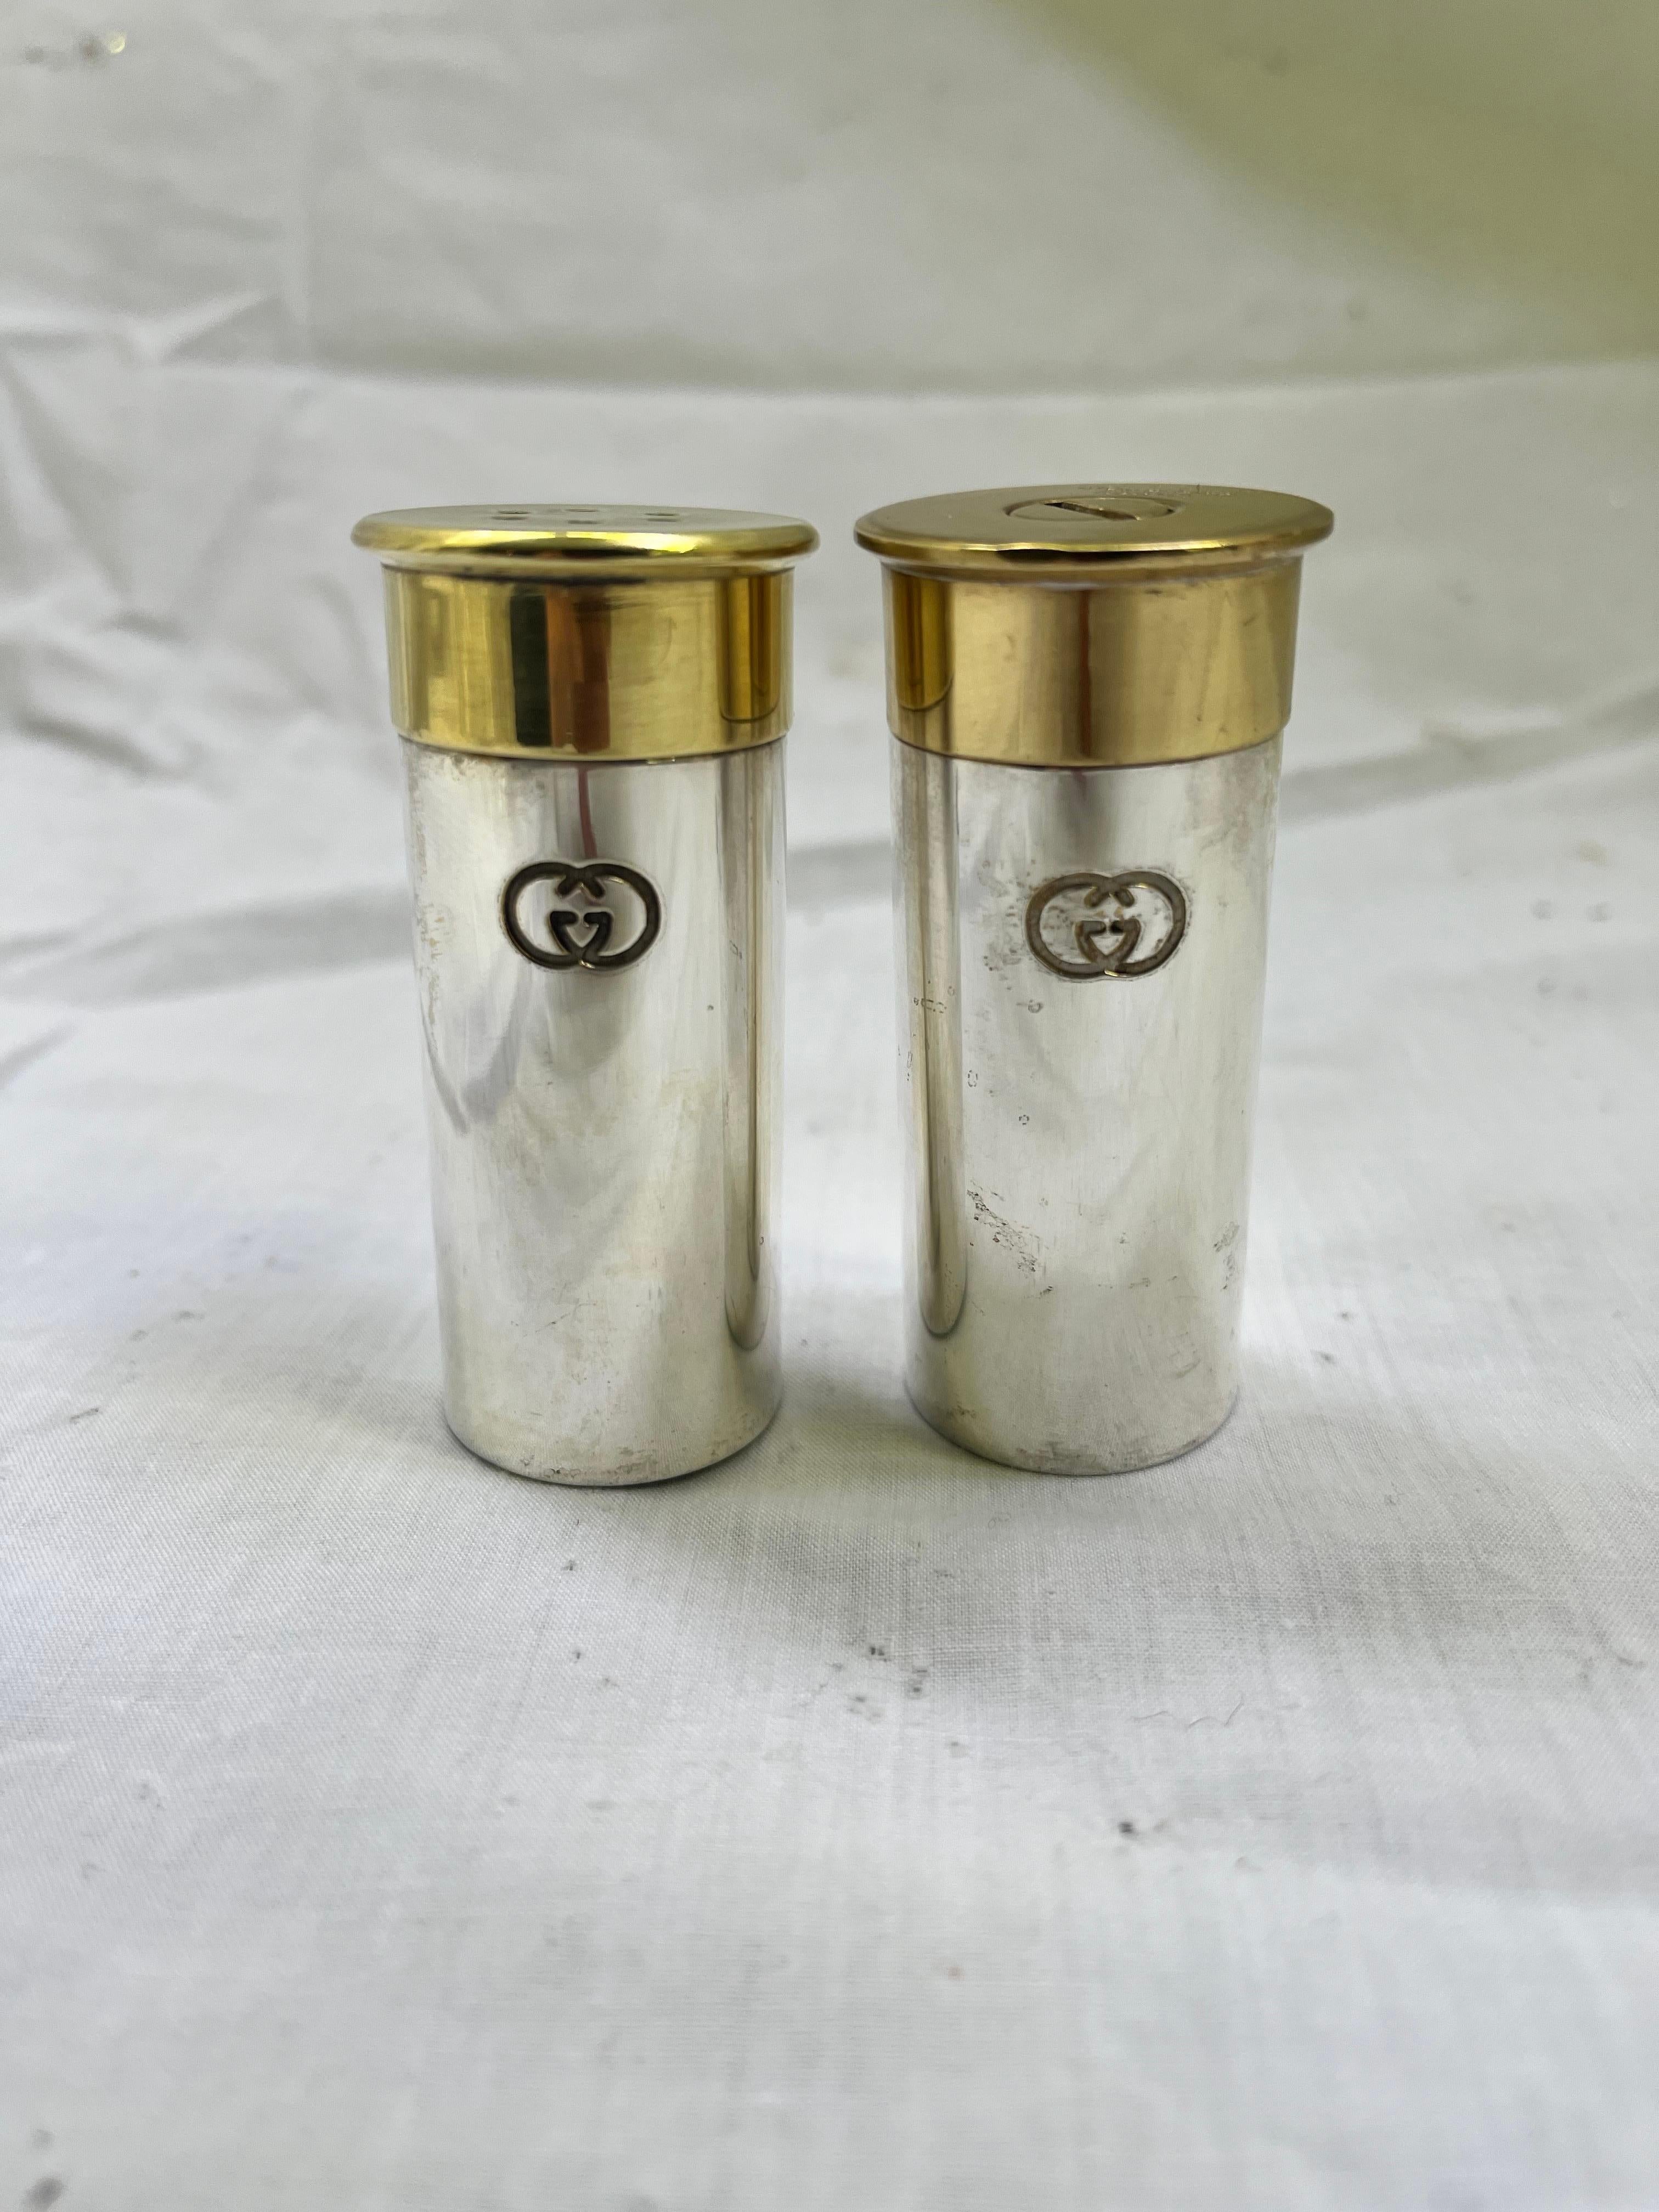 A vintage pair of circa 1980's Gucci Double G logo faux shotgun shell salt and pepper set in silver plate and brass. This set is the perfect gift for that June (shotgun wedding) bride in your life. Or perhaps it's a White Wedding, a la Billy Idol.